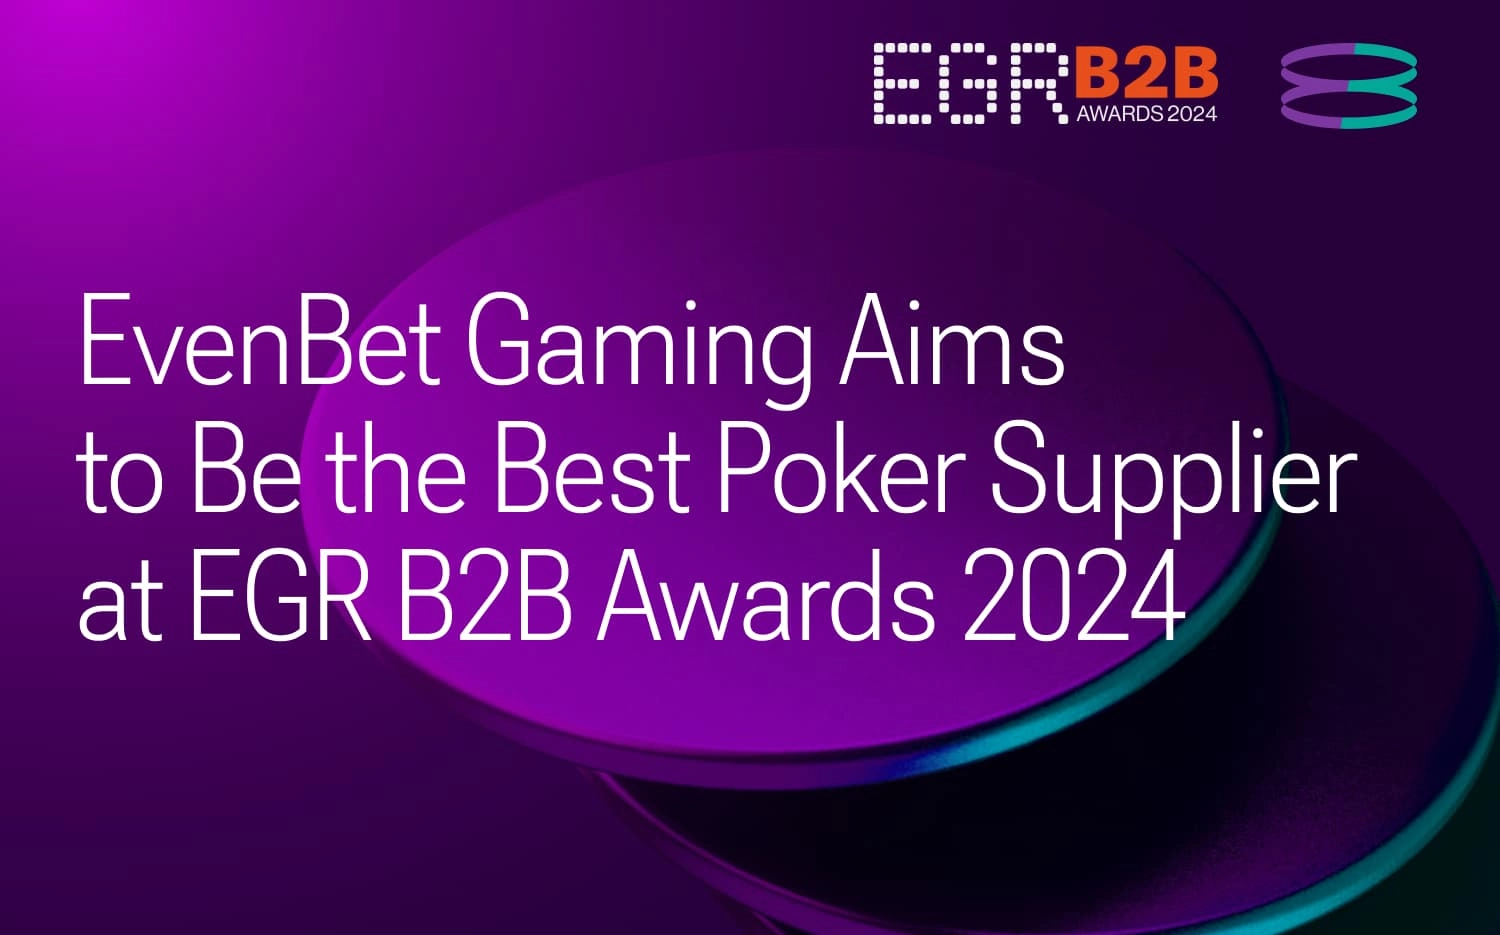 EvenBet Gaming Aims to Be the Best Poker Supplier at EGR B2B Awards 2024